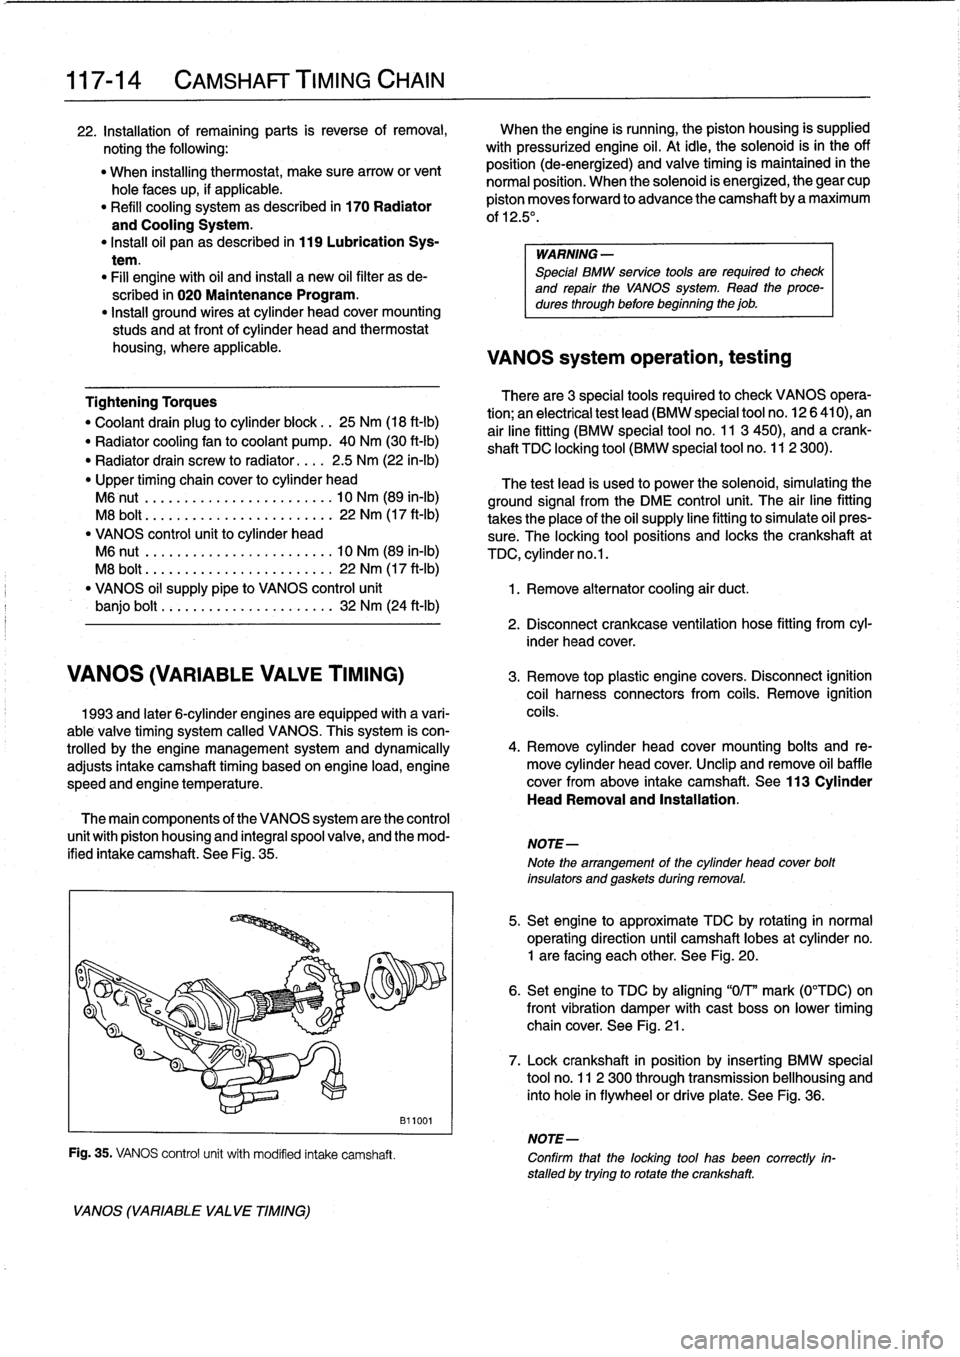 BMW 318i 1992 E36 Workshop Manual 
117-
1
4

	

CAMSHAFT
TIMING
CHAIN

22
.
Installation
of
remaining
parts
is
reverse
of
removal,

	

When
theengine
is
running,
the
piston
housing
is
supplied

noting
the
following
:

	

with
pressuri